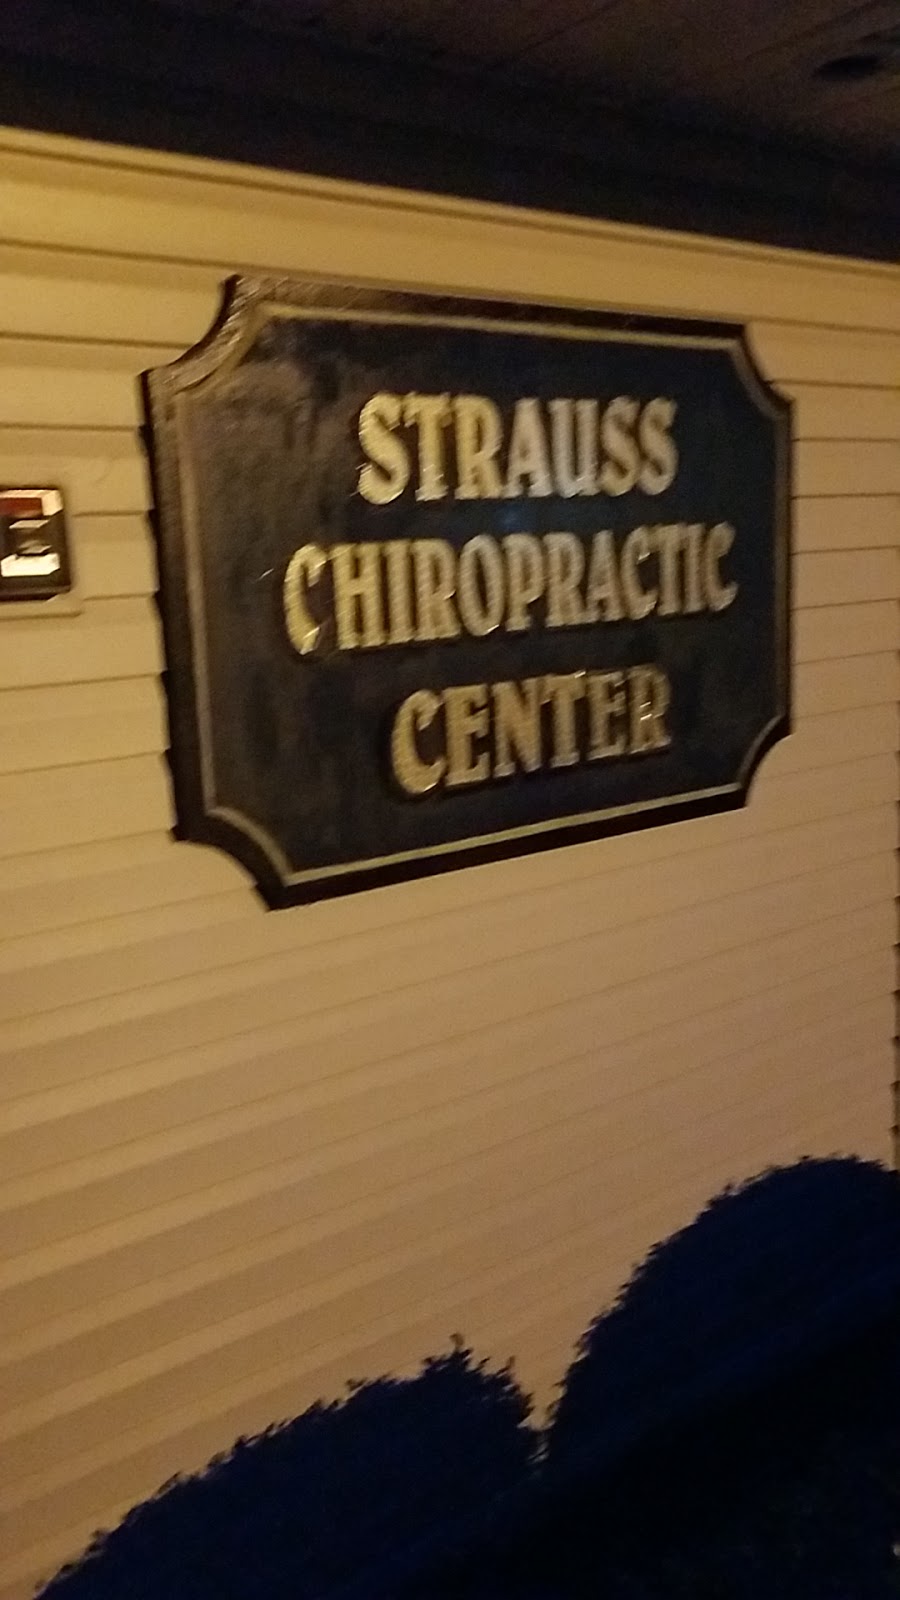 Strauss Chiropractic Center | 1405 Frosty Hollow Rd, Levittown, PA 19056 | Phone: (215) 946-6815